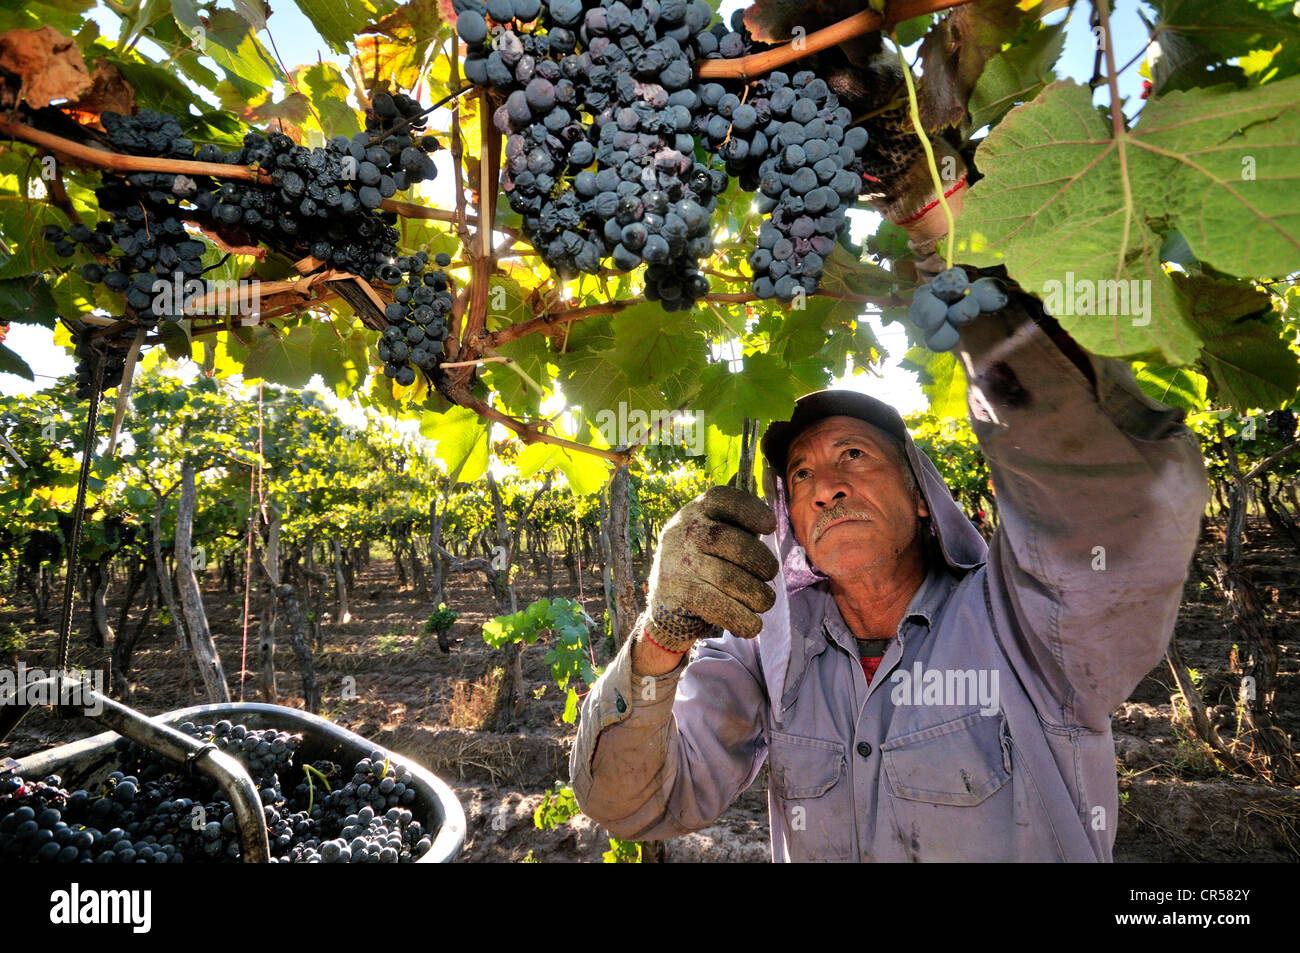 Picker during the vintage of Syrah grapes on the Carinae vineyard in Maipu, Mendoza Province, Argentina, South America Stock Photo